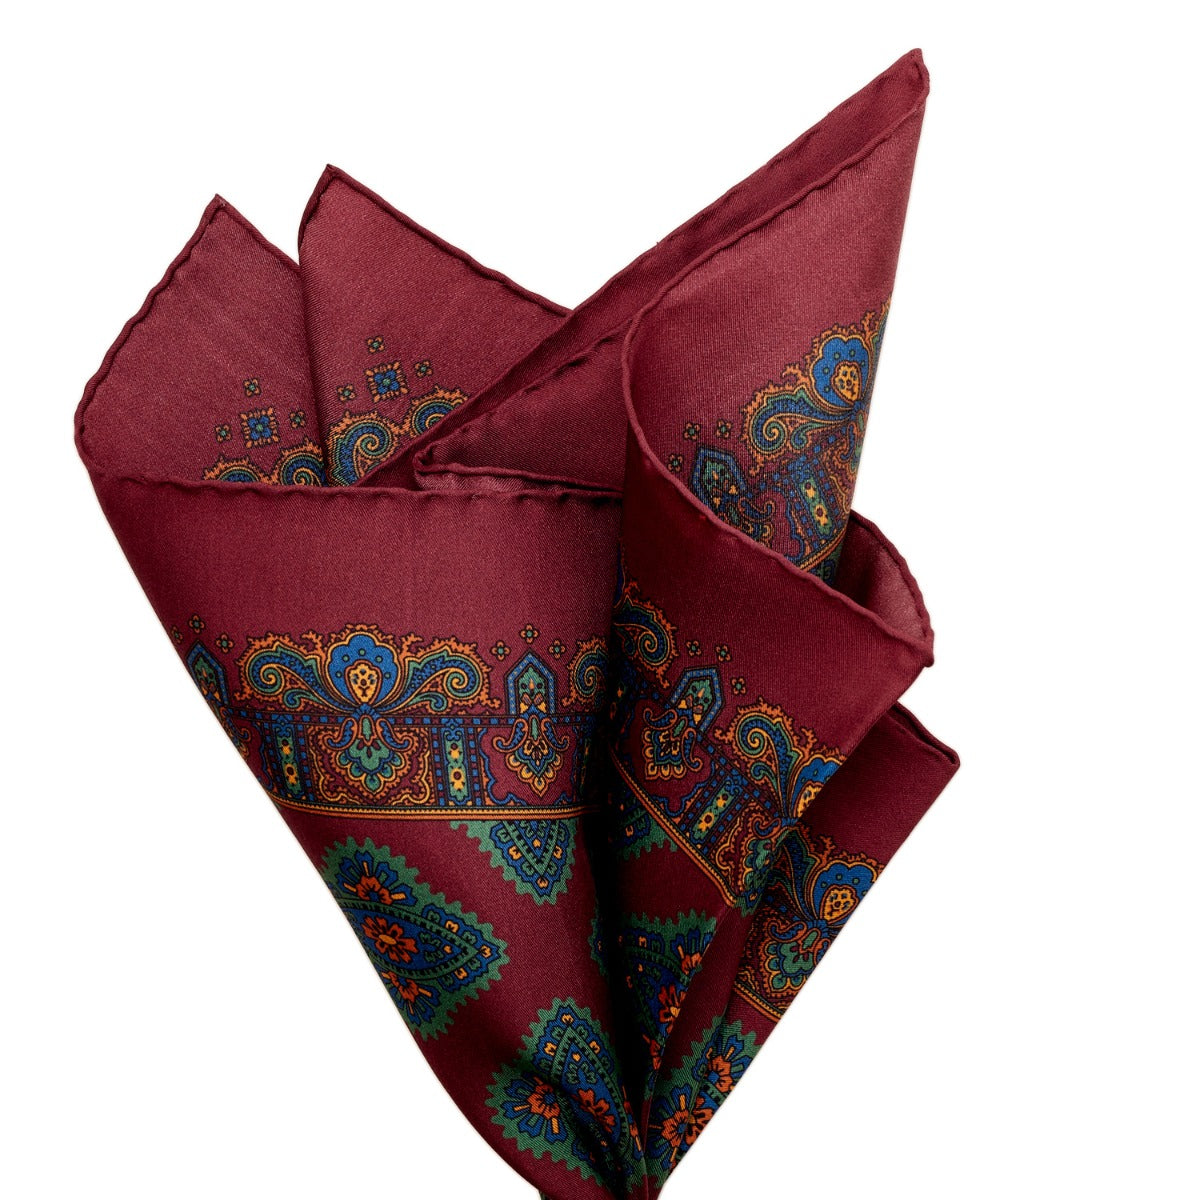 A Sovereign Grade 100% Silk Burgundy Pocket Square with hand-rolled edges made from English silk, from KirbyAllison.com.